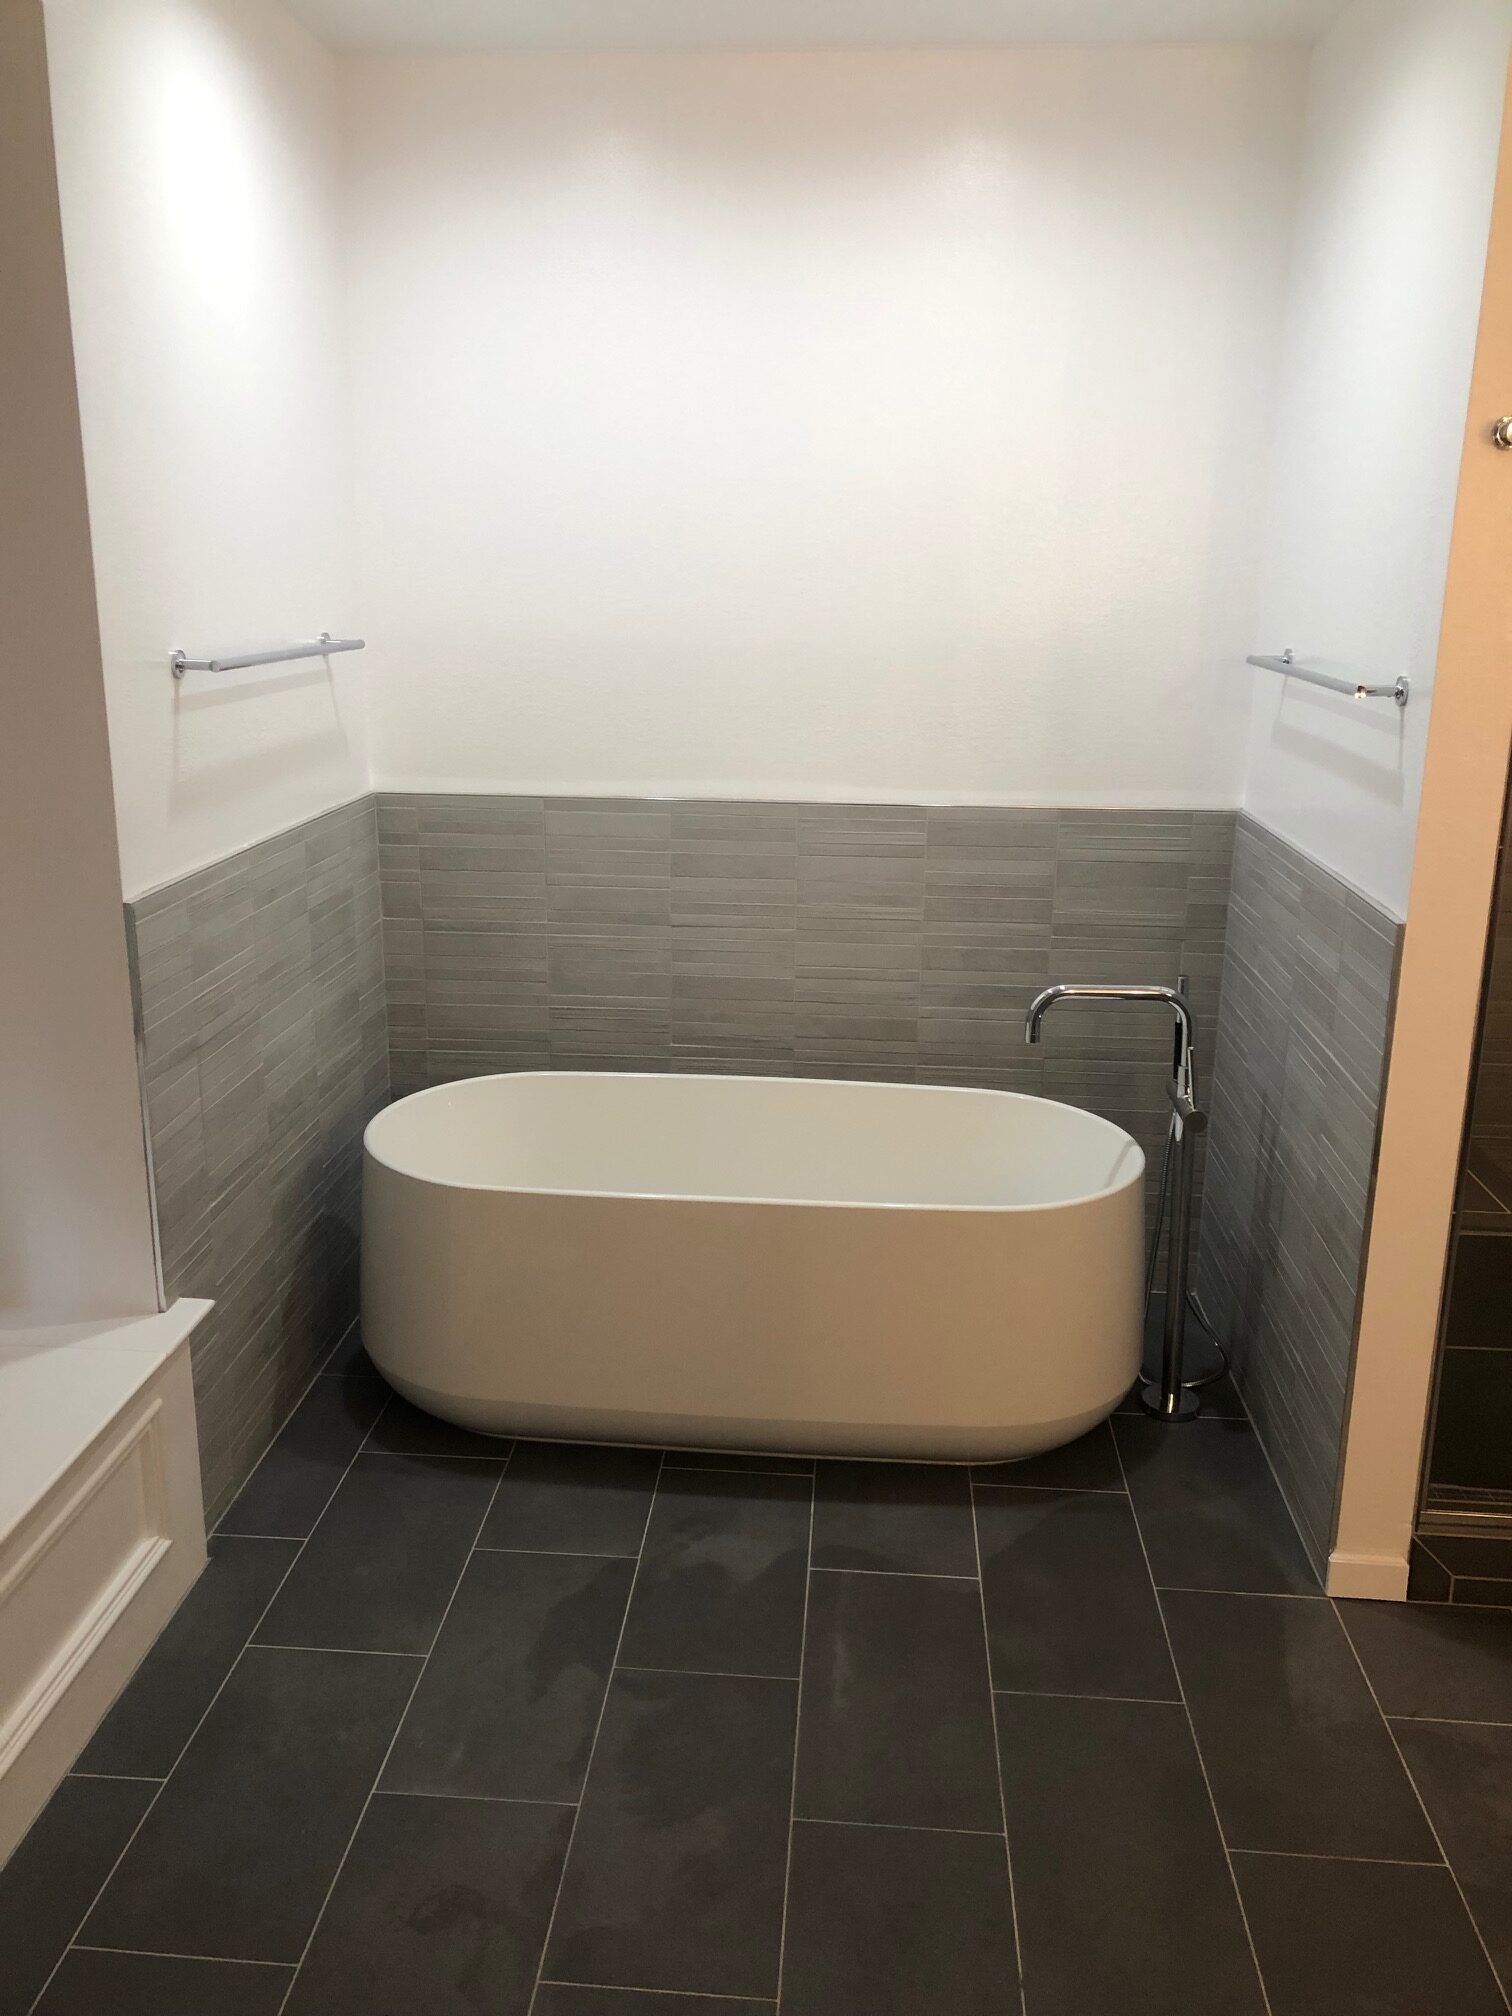 Read more about the article Bathroom remodel with a free standing tub